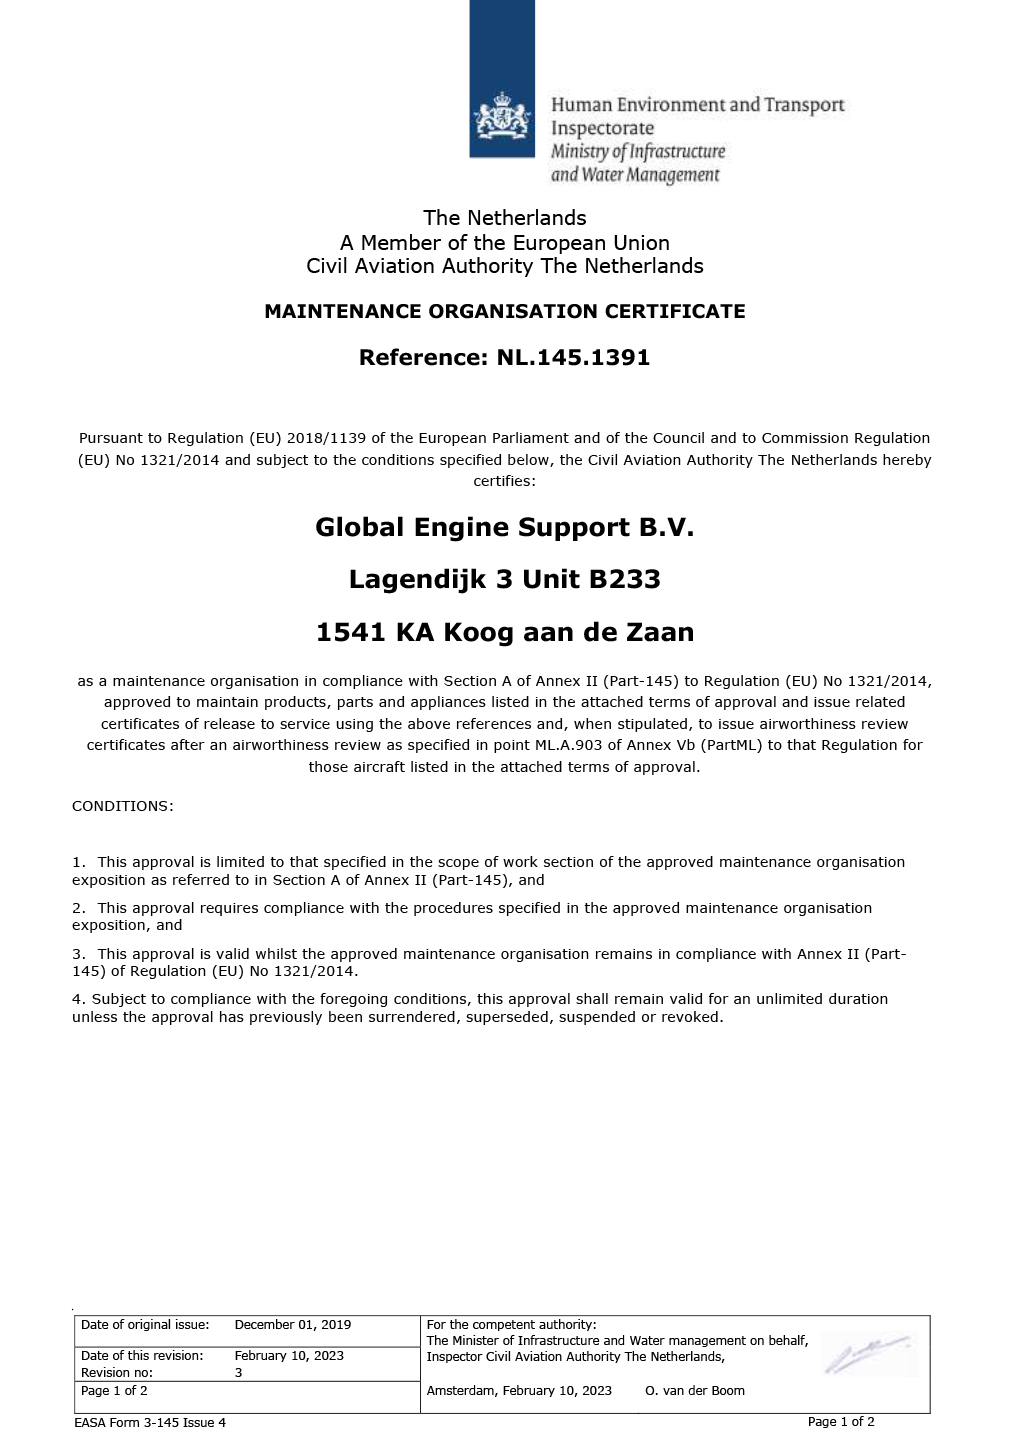 Maintenance Orgainsation Approval Certificate | Global Engine Support